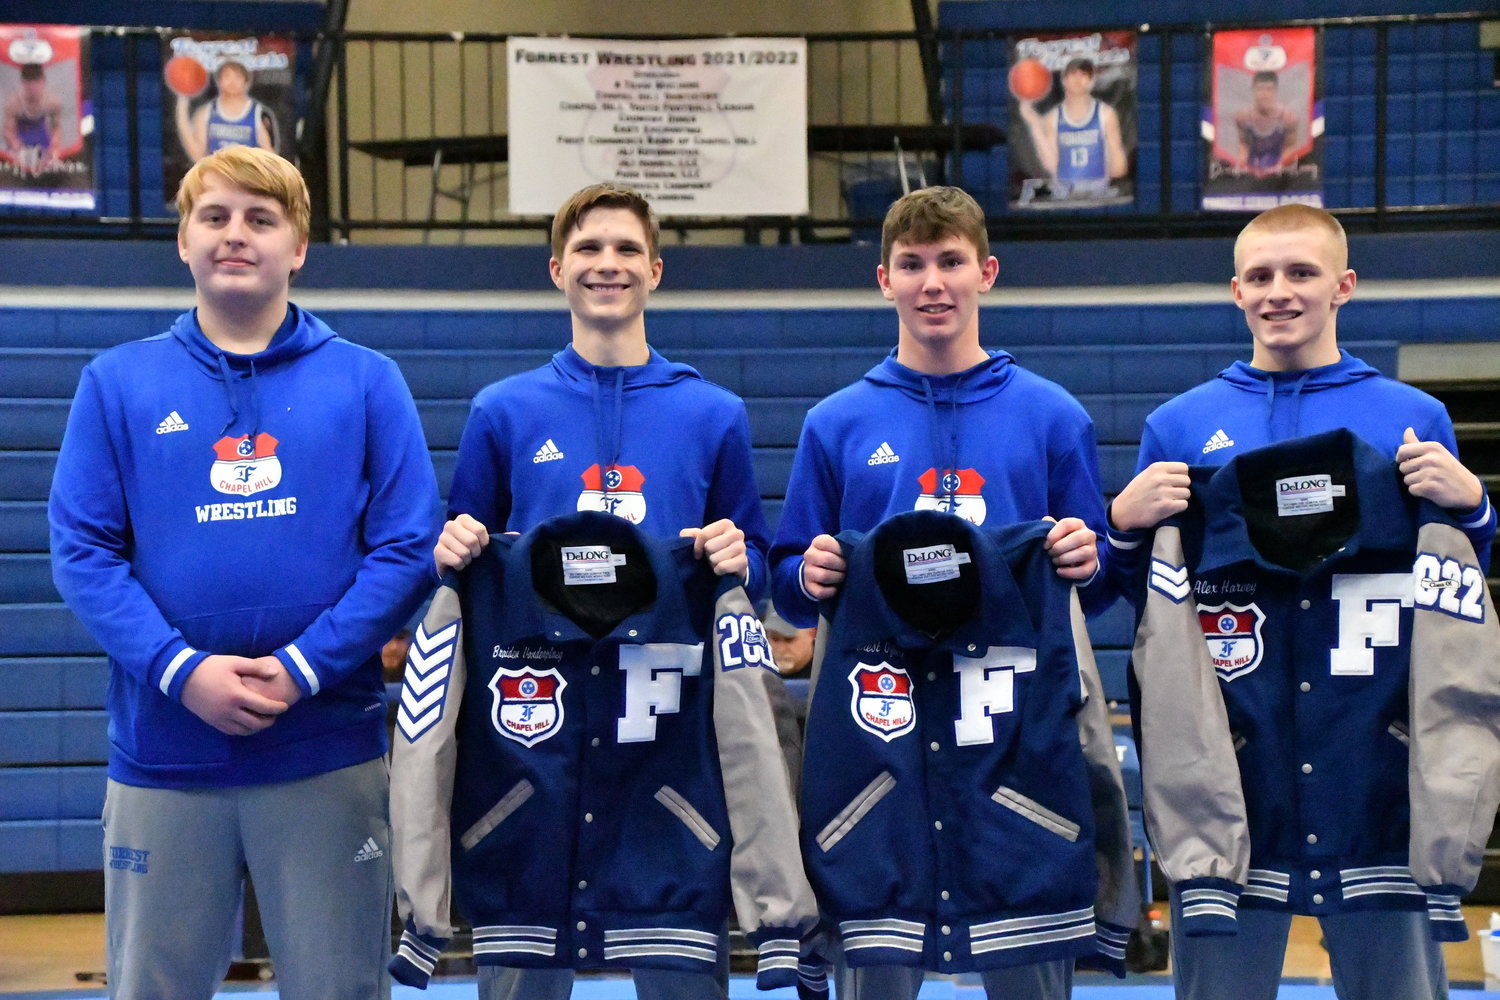 Five Forrest Rockets were recognized Tuesday on Senior Night. From left are Nathan Hall, Braiden Vanderploeg, Forest Ozburn, and Alex Harvey.  Senior Asa Nance was not present.